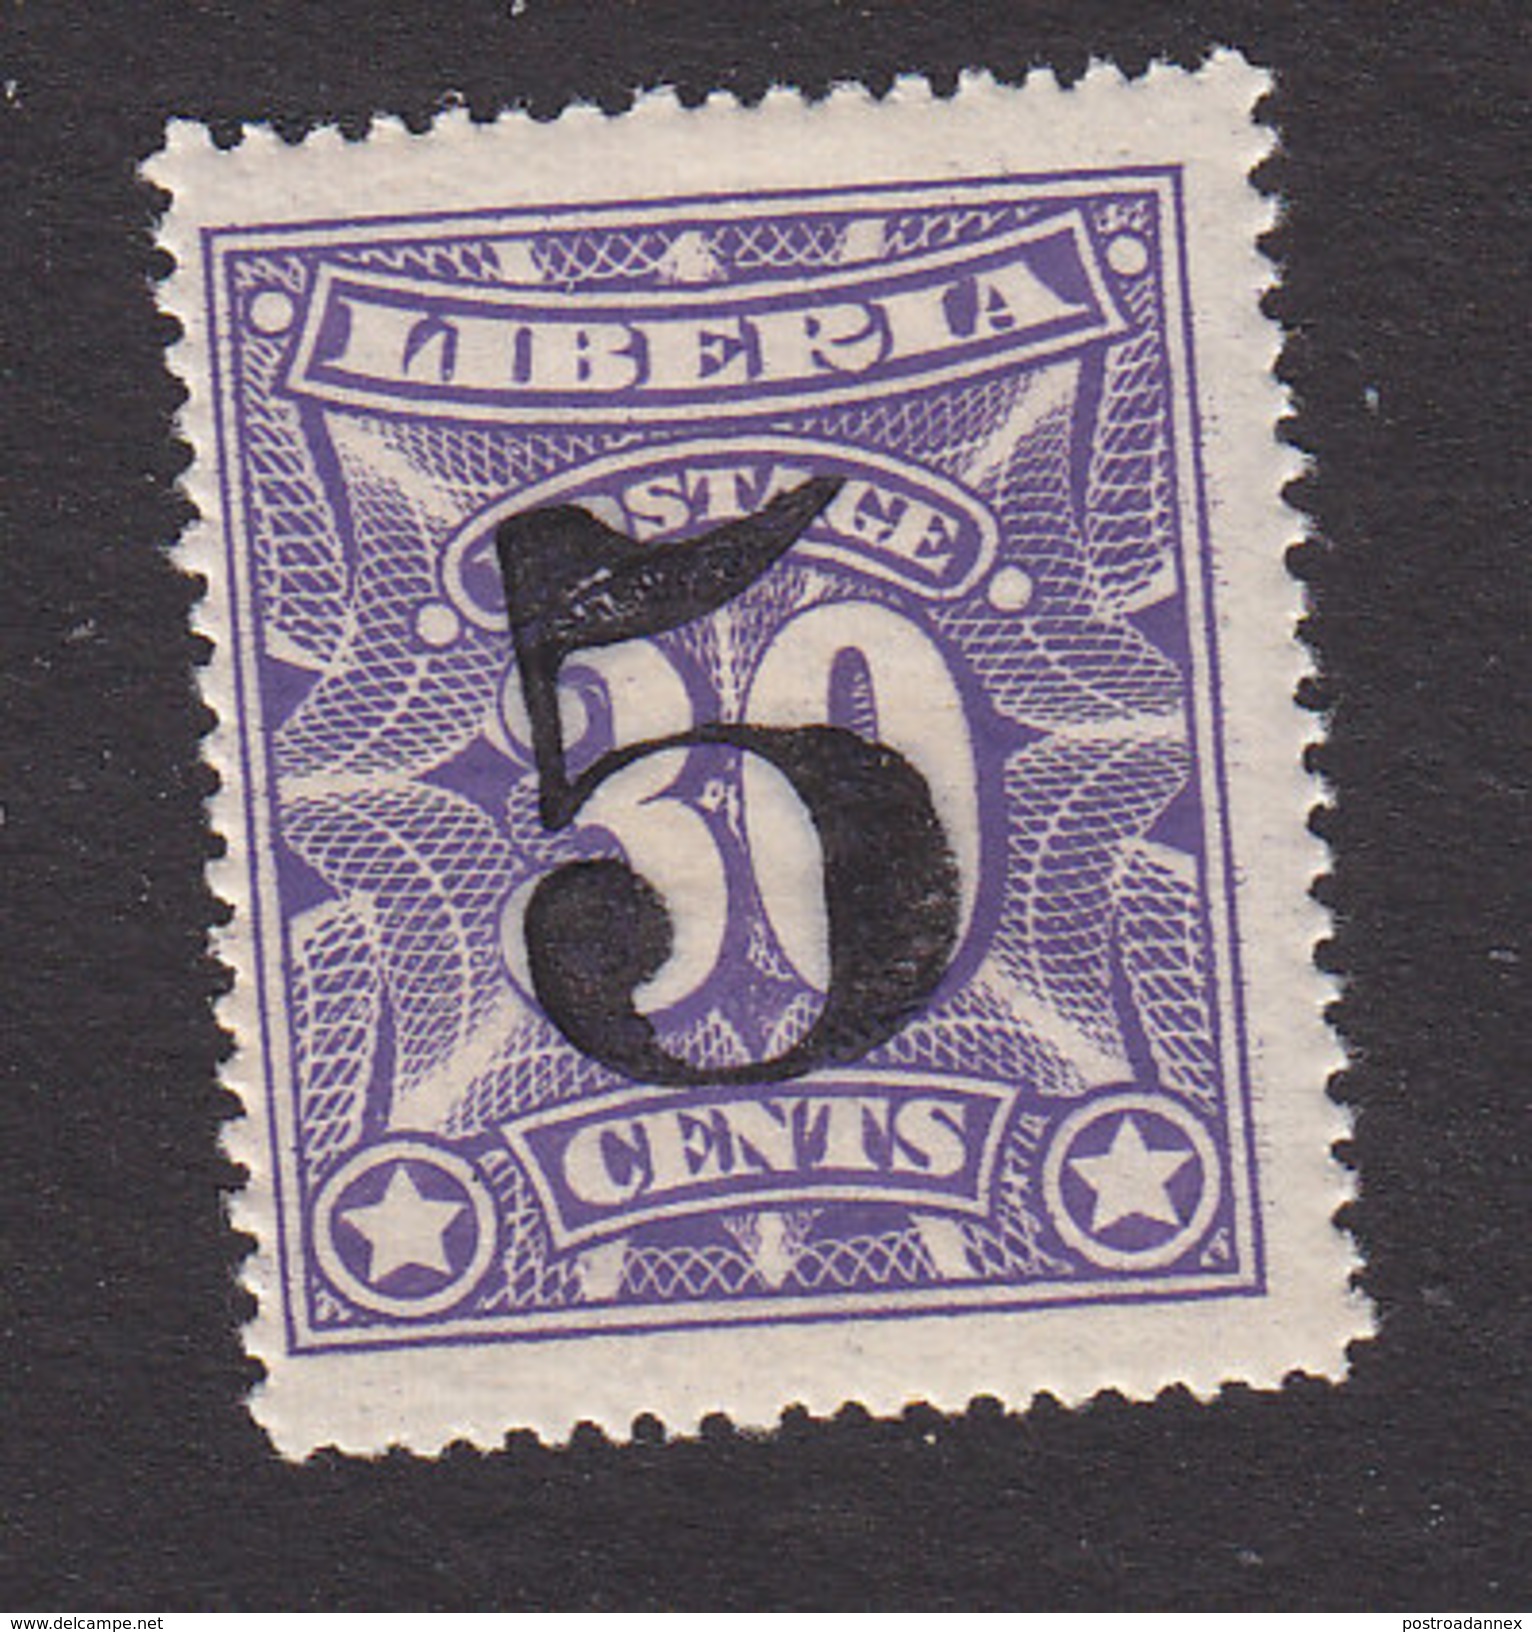 Liberia, Scott #130, Mint Never Hinged, Number Surcharged, Issued 1914 - Liberia